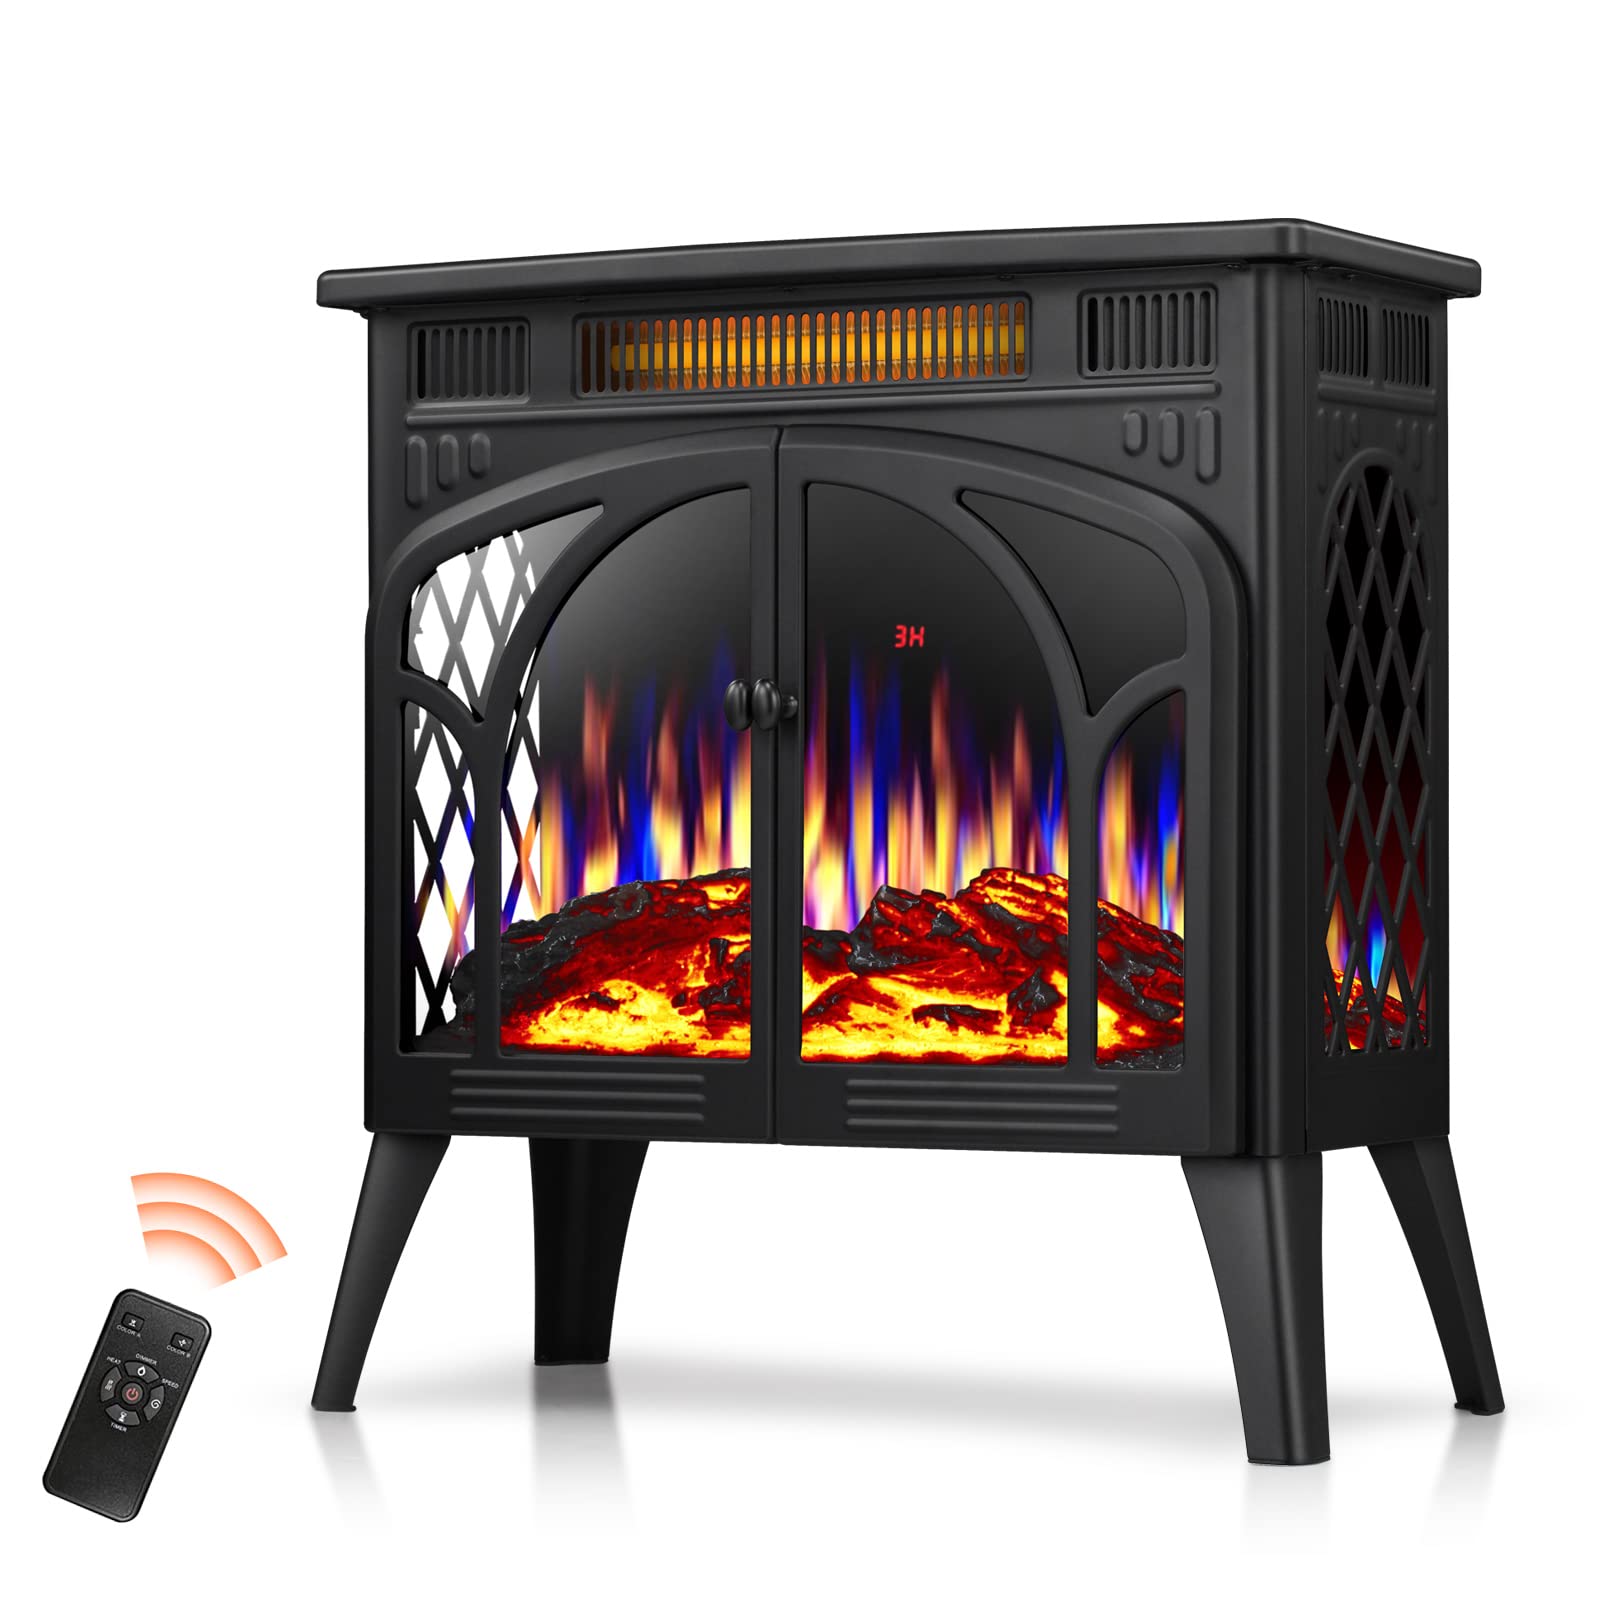 R.W.FLAME 24 Inch Electric Fireplace Stove Heater 1500W Infrared Fireplace Stove w/ 3D Realistic Flame